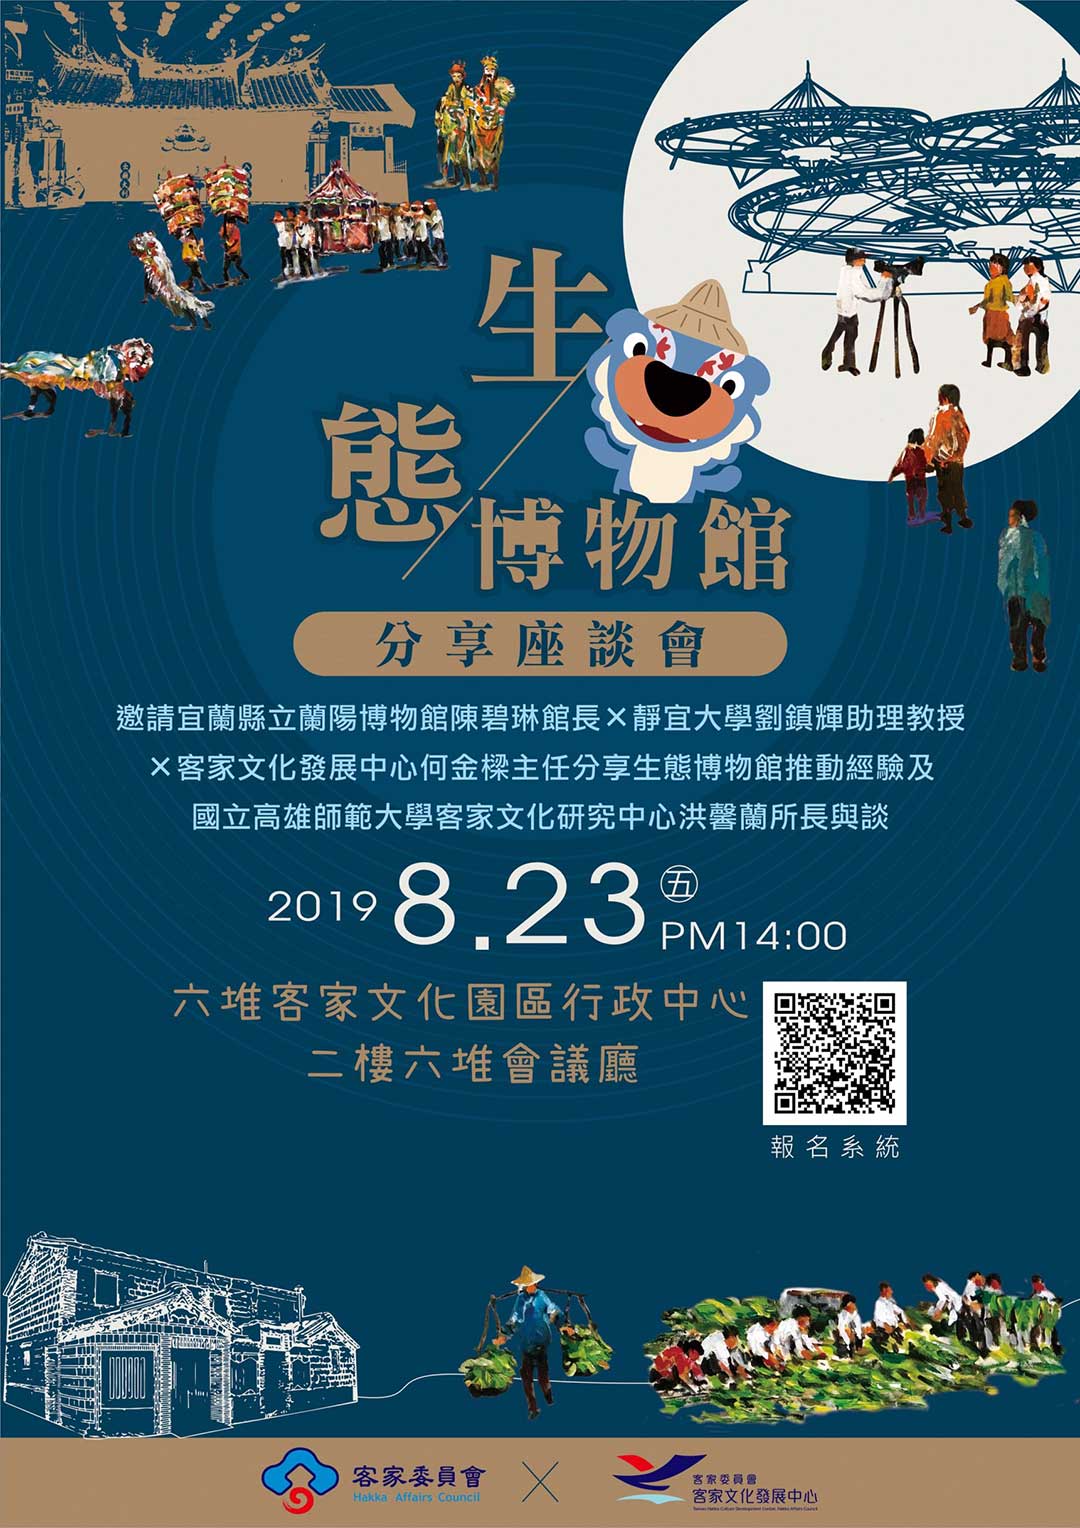  (Poster about the eco-museum forum)